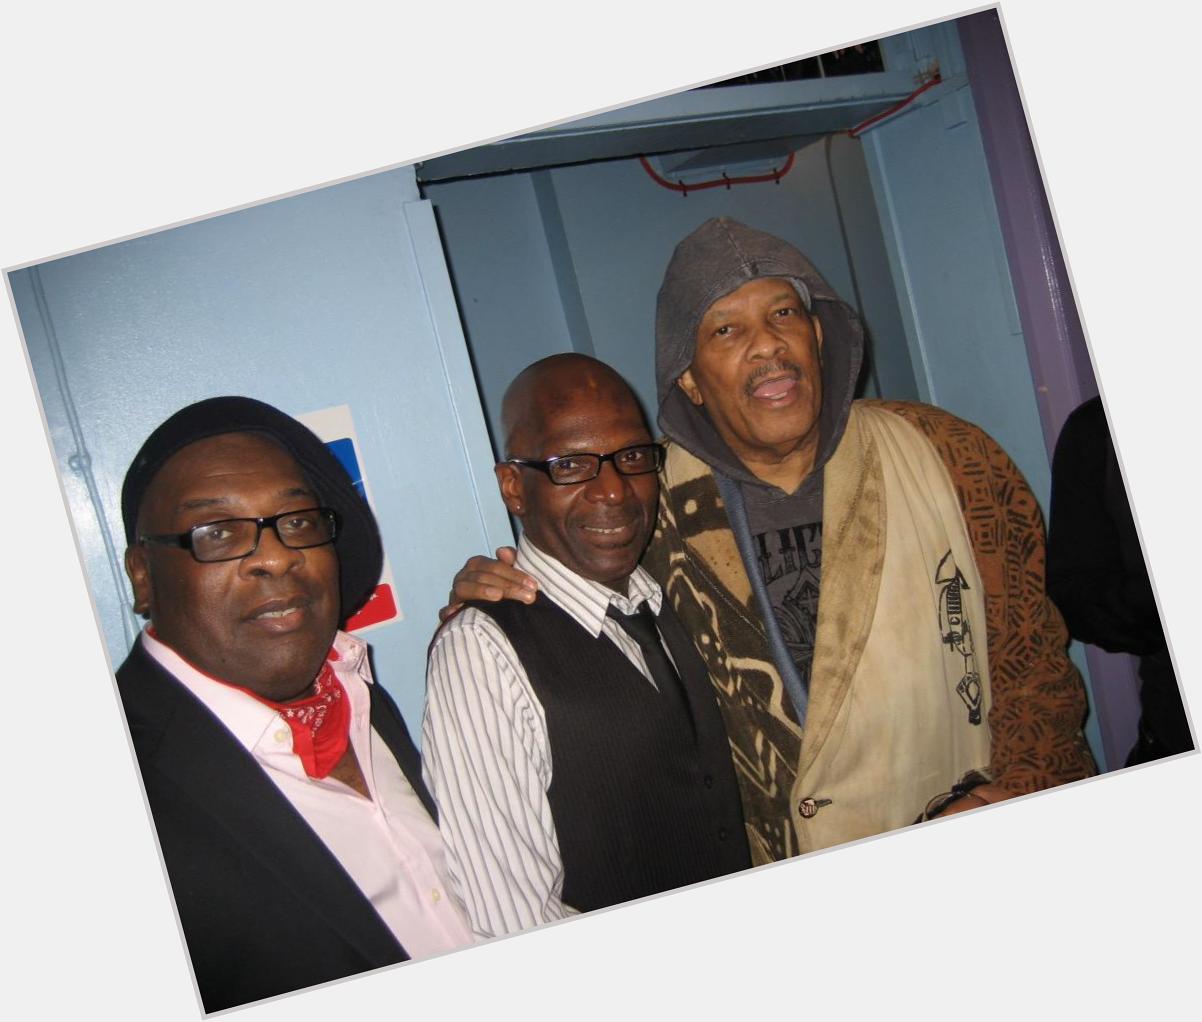 A very Happy 75th Birthday from myself & all 2 music legend Roy Ayers!  funk 